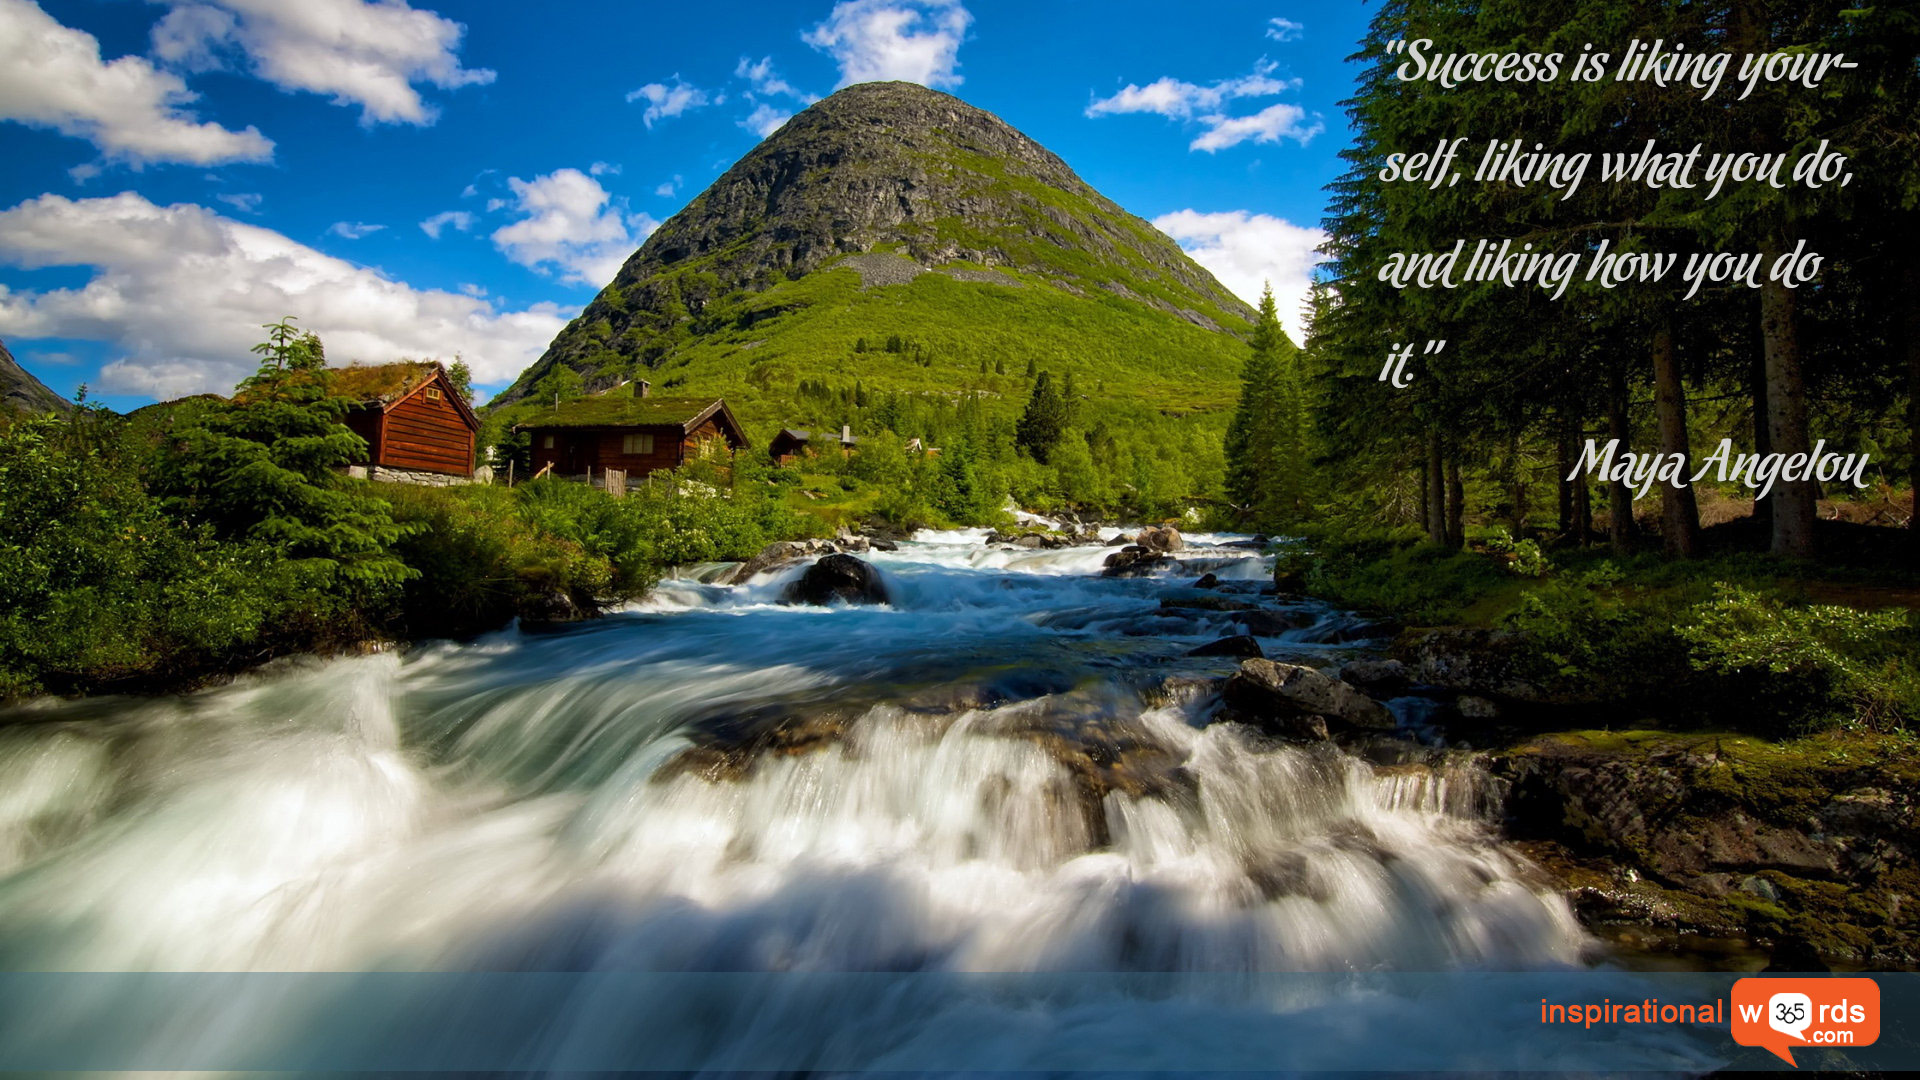 Inspirational Wallpaper Quote by Maya Angelou | Inspirational Words